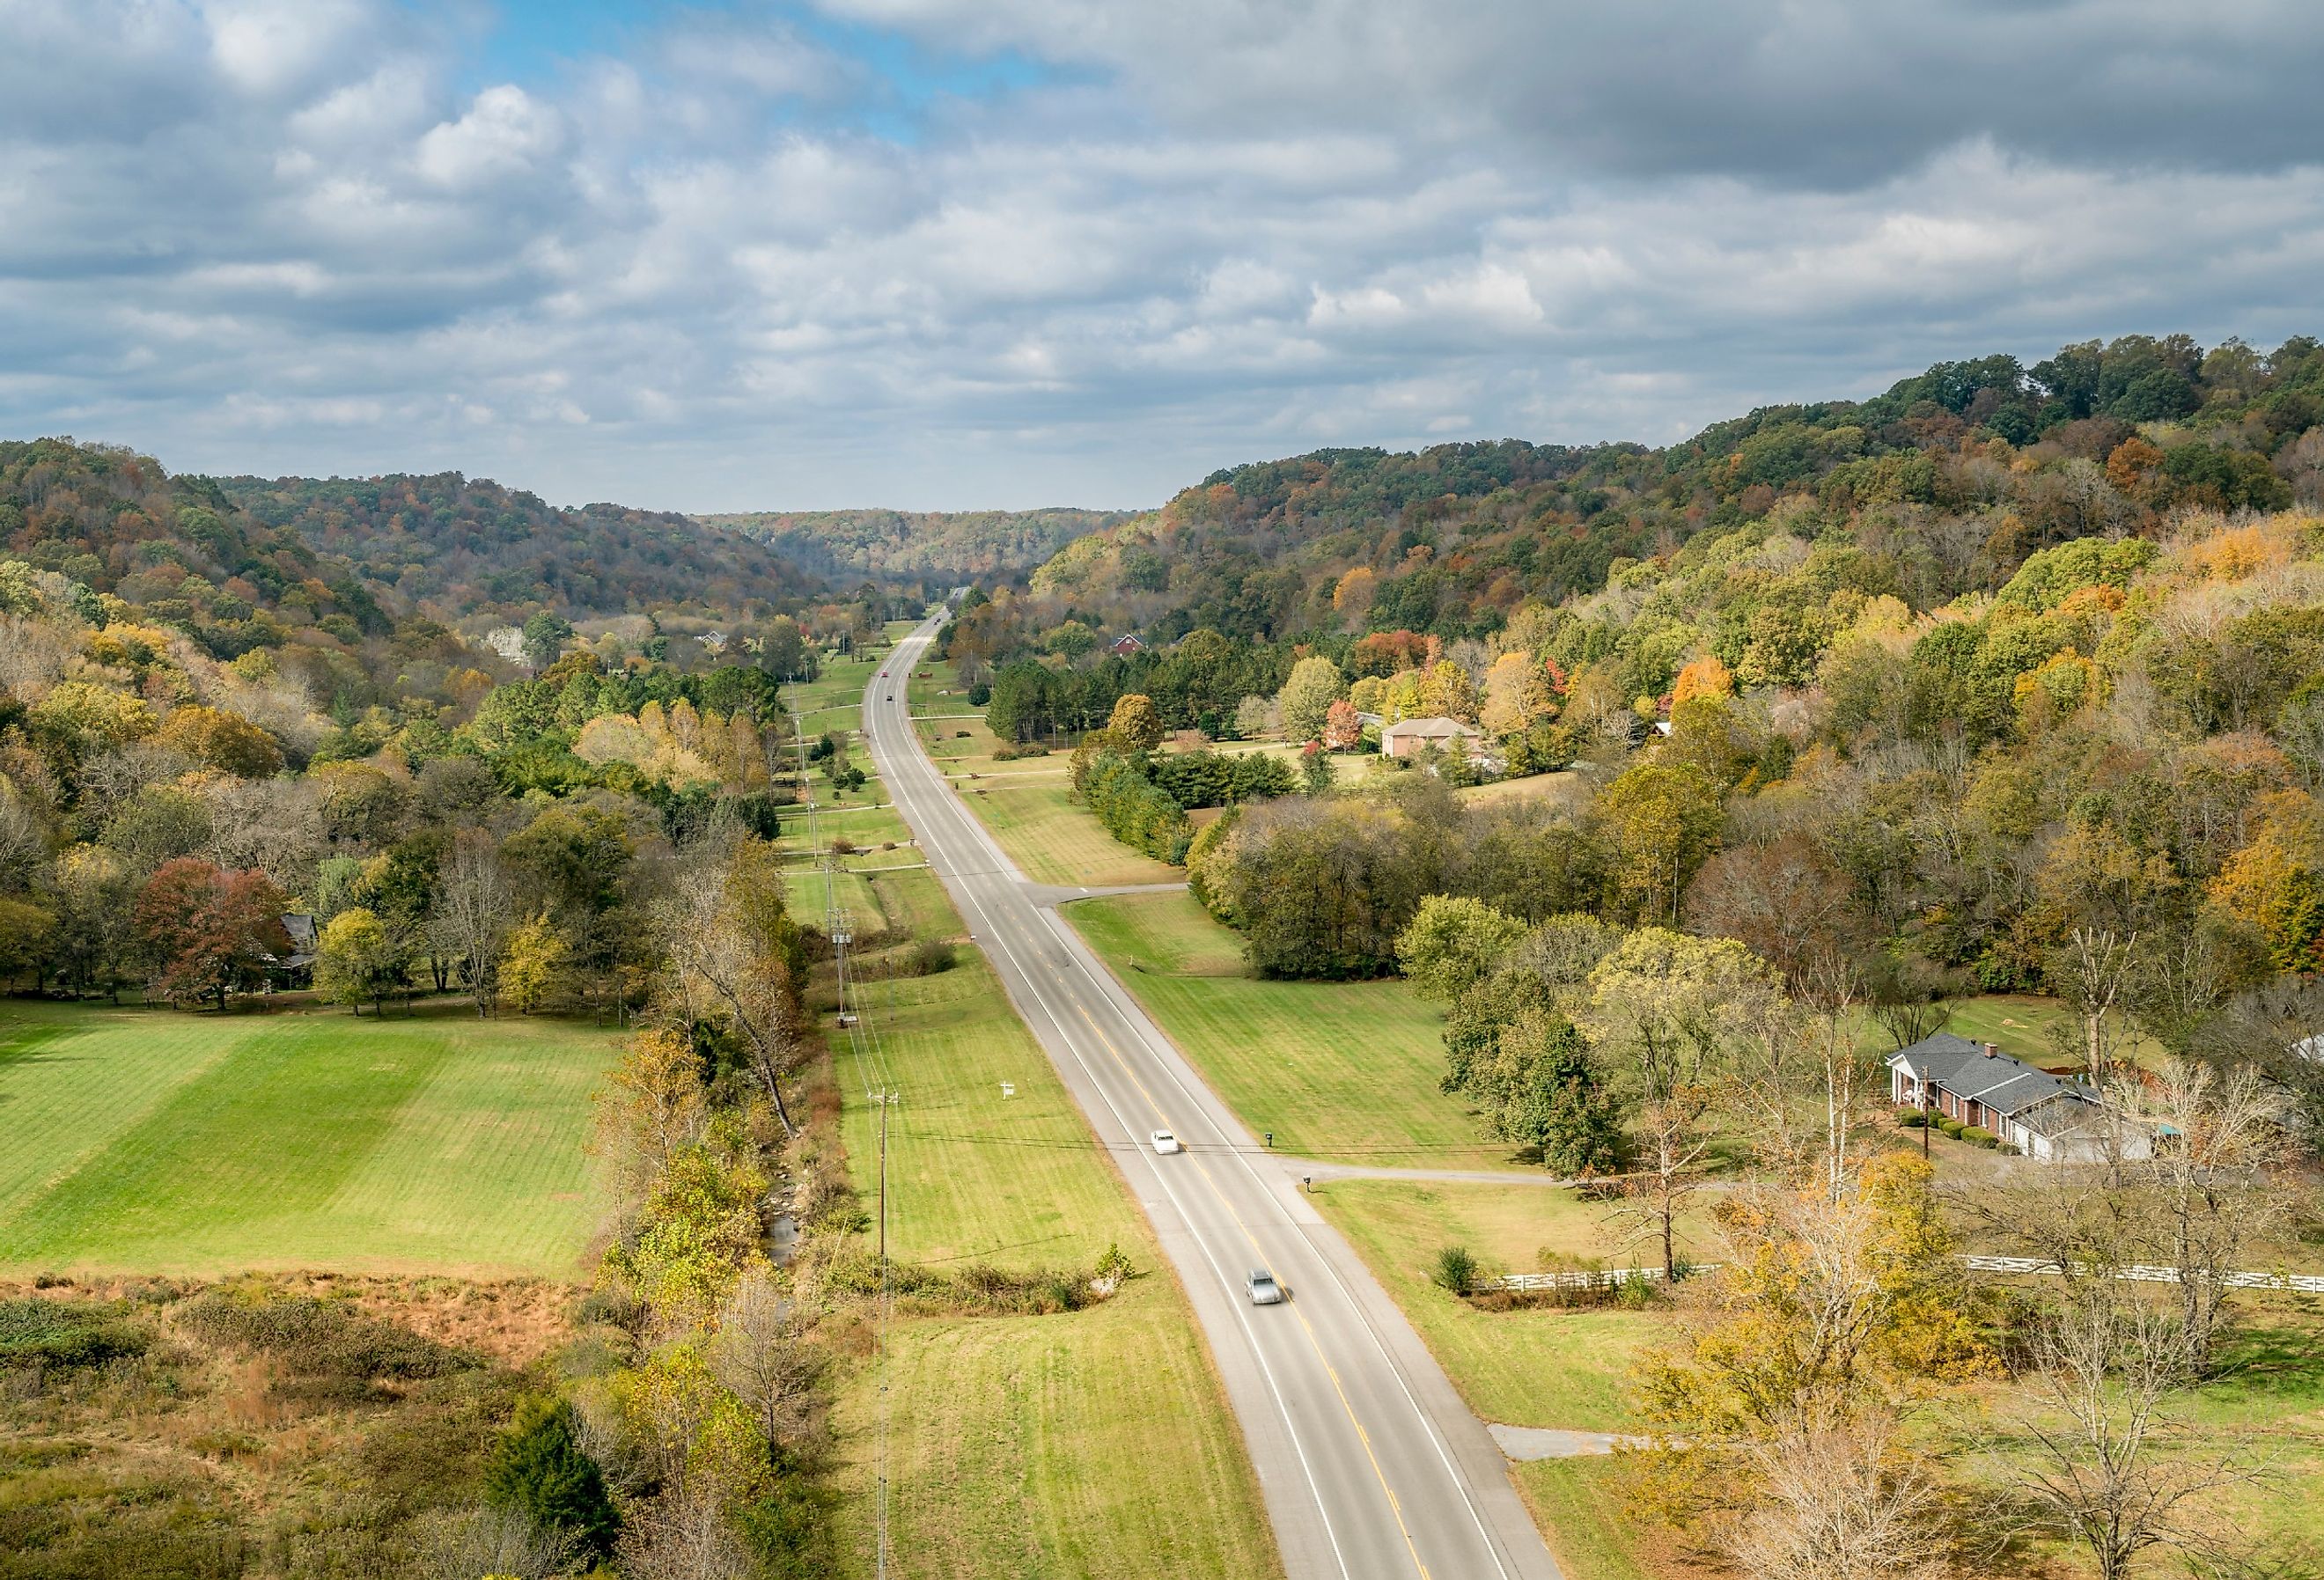 View from the double Arch Bridge at Natchez Trace Parkway.